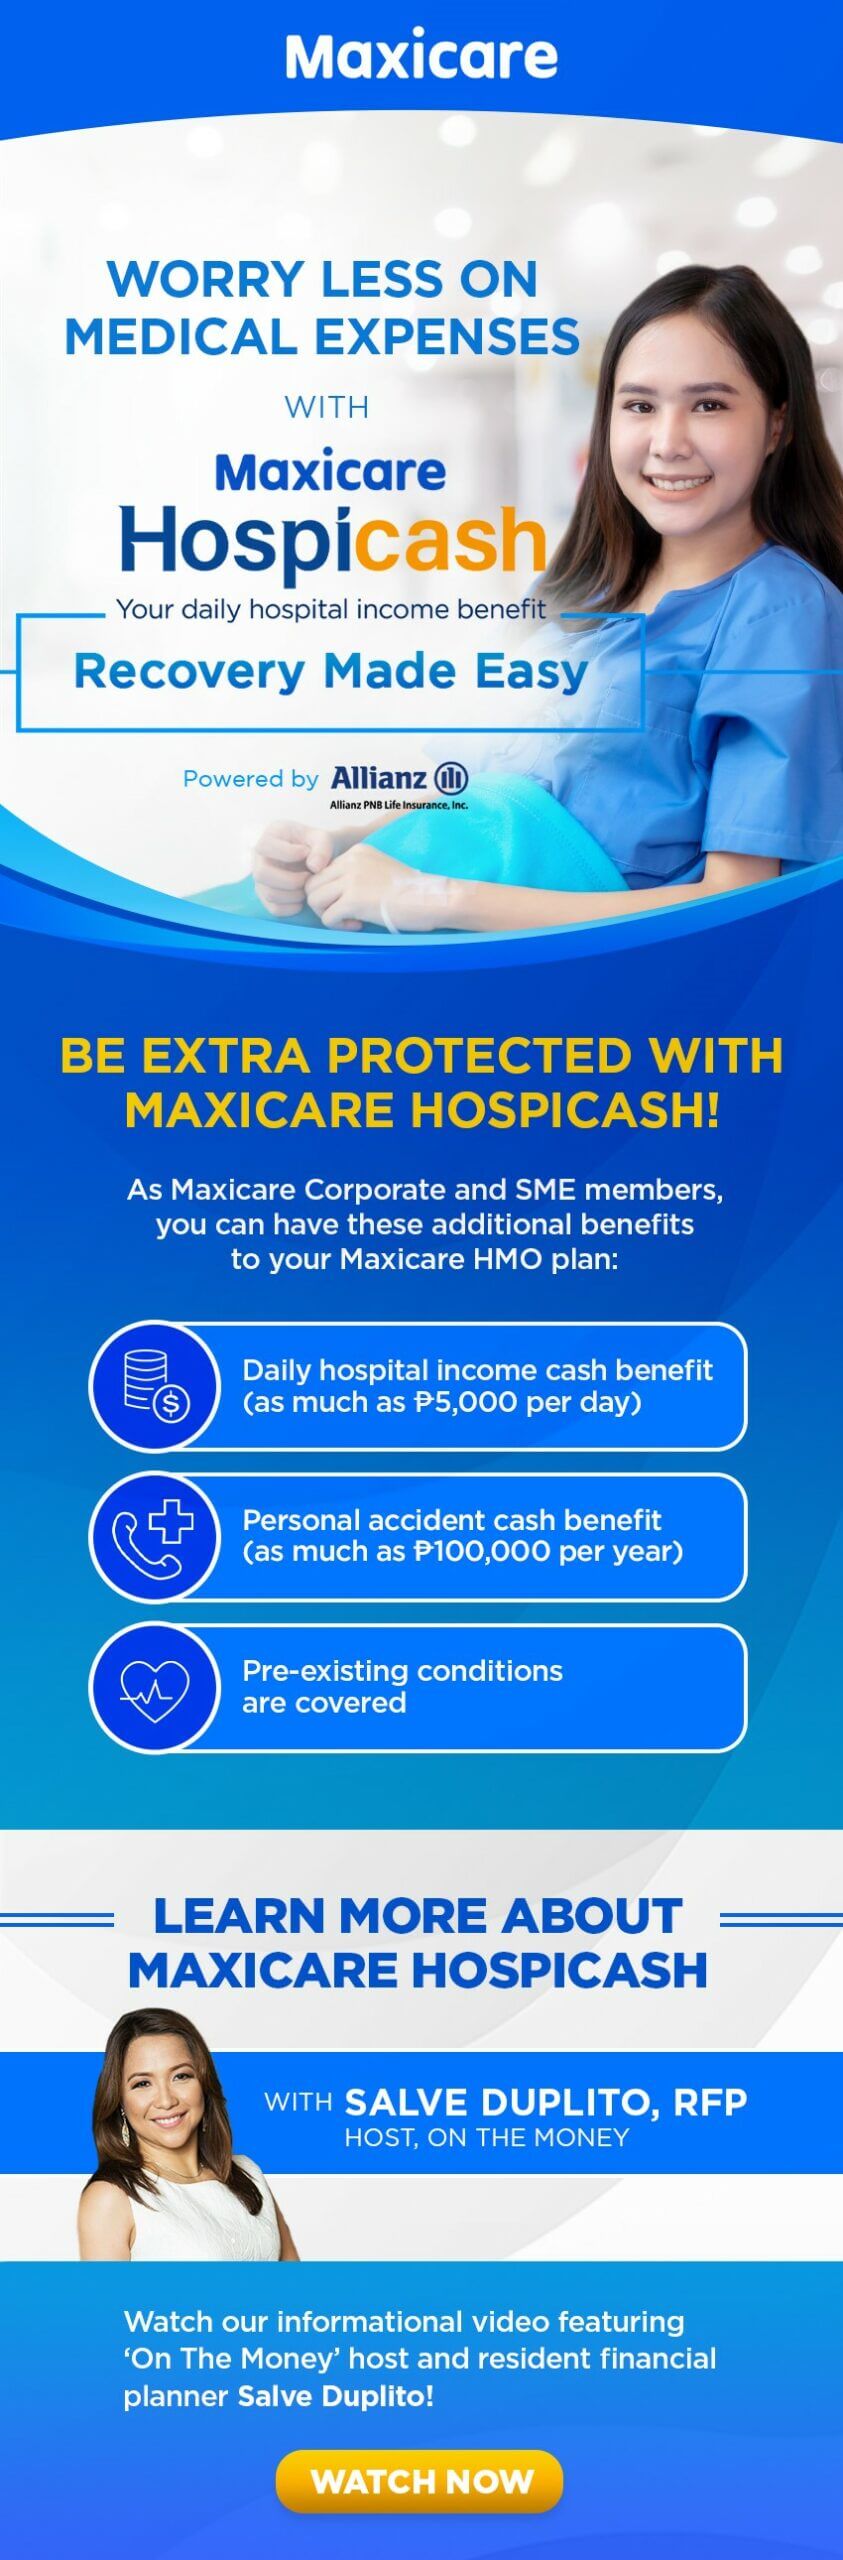 Maxicare hospicash infographic image